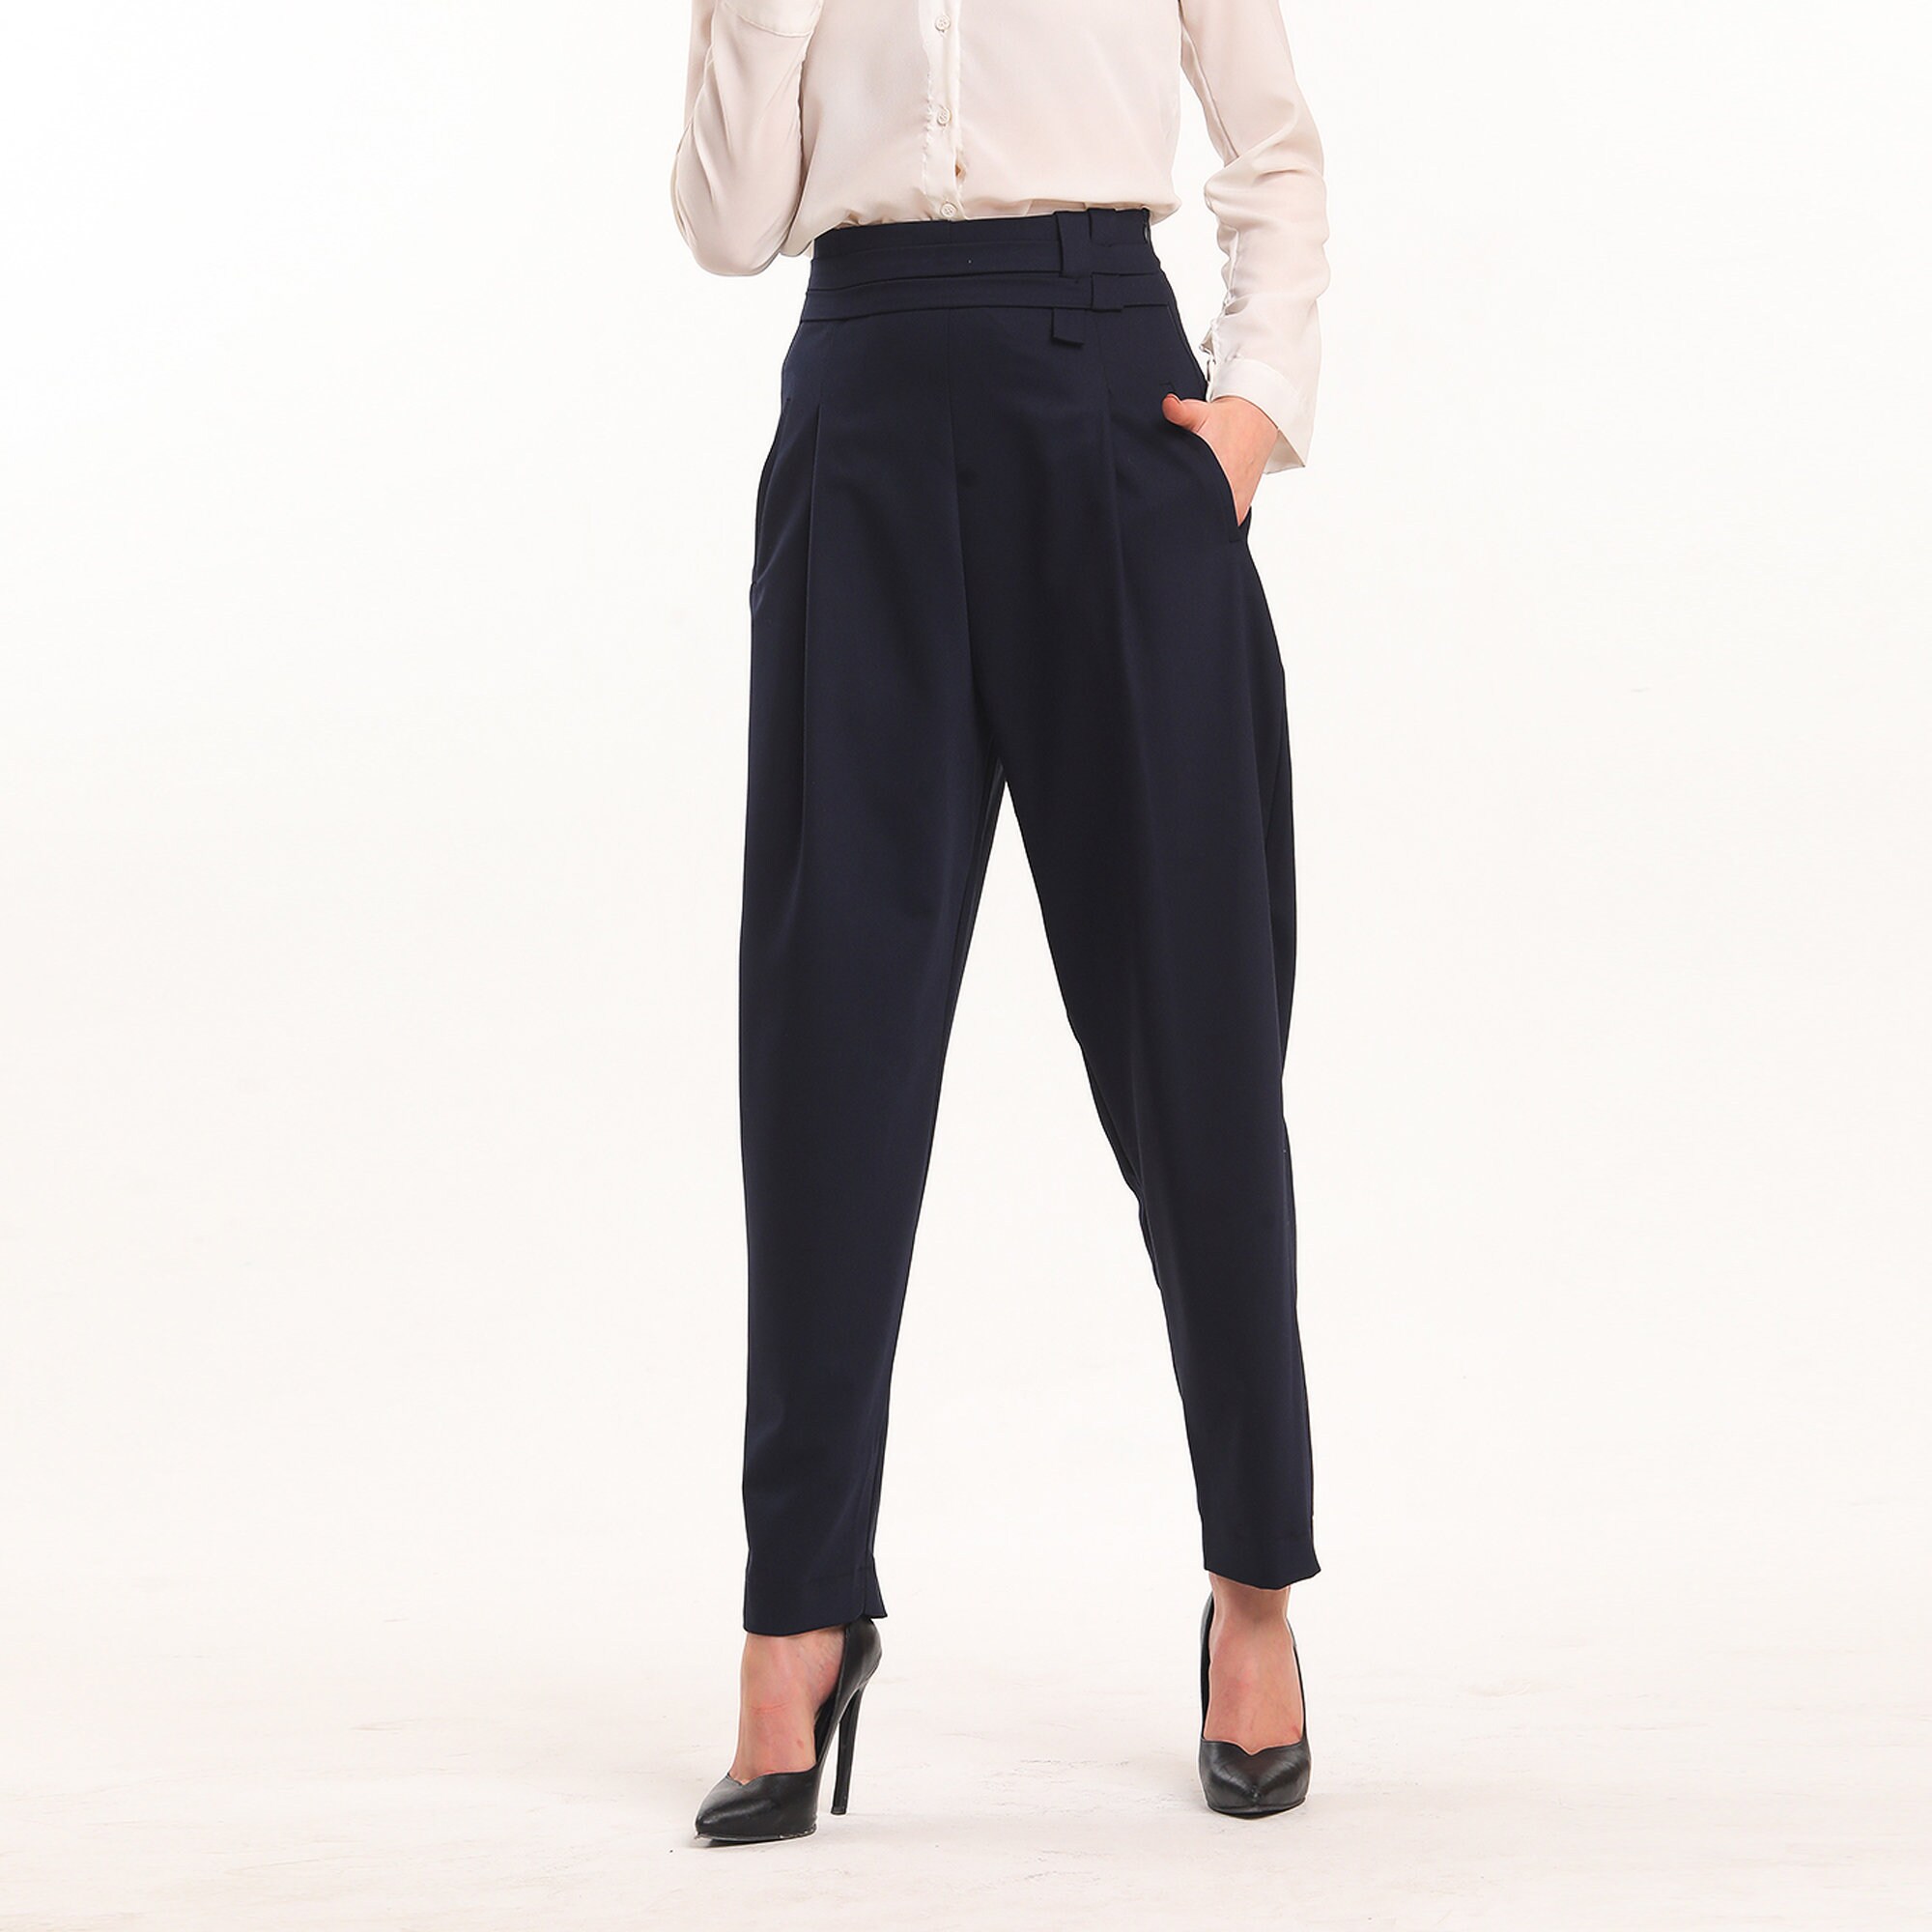  Pants for Women High Waist Tapered Pants (Color